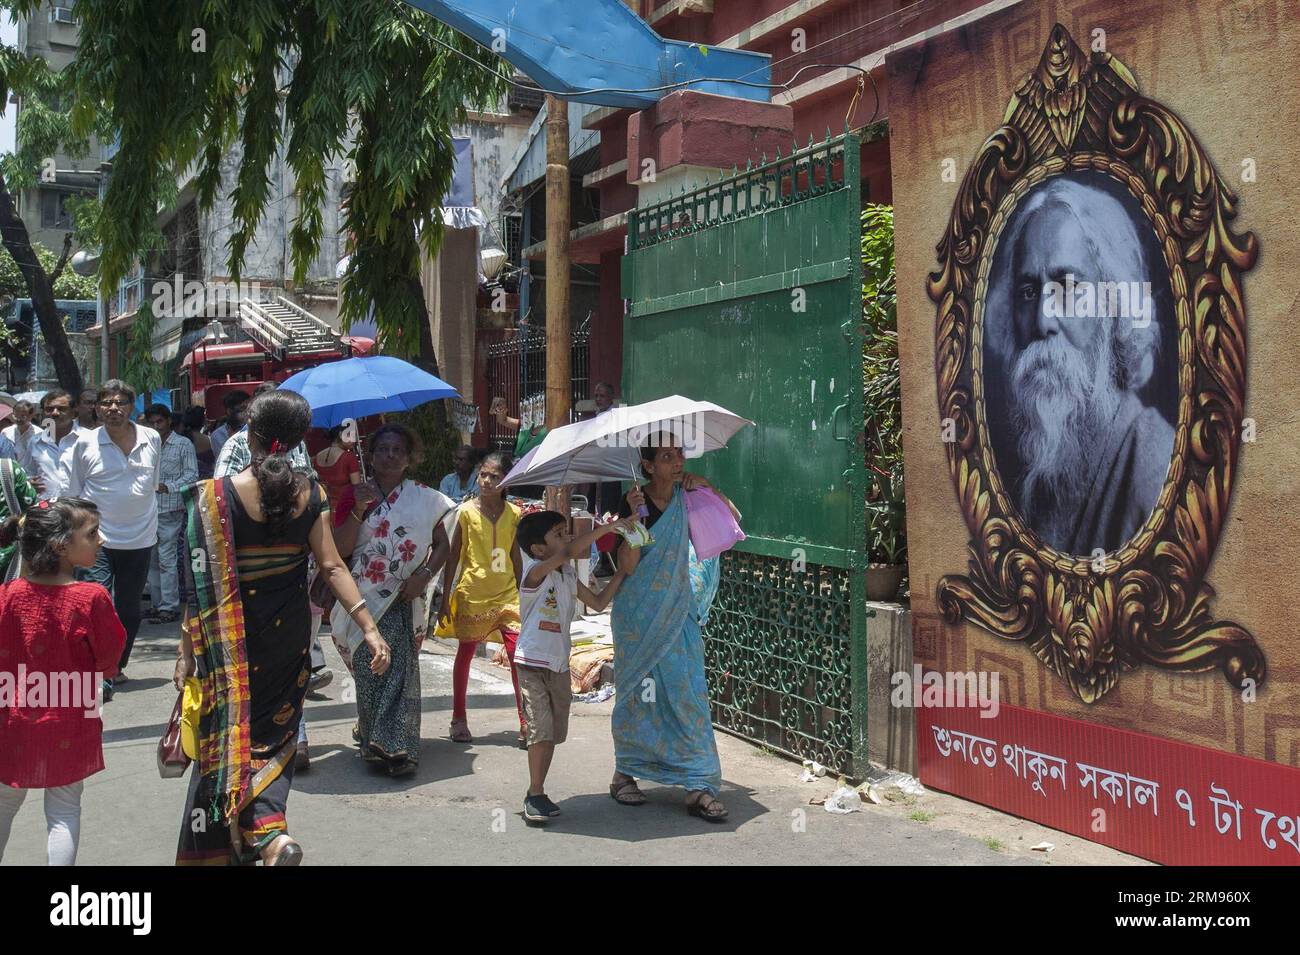 (140509) -- CALCUTTA, May 9, 2014 (Xinhua) -- Visitors pass a photo of Rabindranath Tagore as they enter the Nobel laureate s house during a celebration of Tagore s birth anniversary in Calcutta, east of India on May 9, 2014. (Xinhua Photo/Tumpa Mondal) (lmz) INDIA-TAGORE-ANNIVERSARY PUBLICATIONxNOTxINxCHN   Calcutta May 9 2014 XINHUA Visitors Passport a Photo of Rabindranath Tagore As They Enter The Nobel Laureate S House during a Celebration of Tagore S Birth Anniversary in Calcutta East of India ON May 9 2014 XINHUA Photo Tumpa Mondal  India Tagore Anniversary PUBLICATIONxNOTxINxCHN Stock Photo